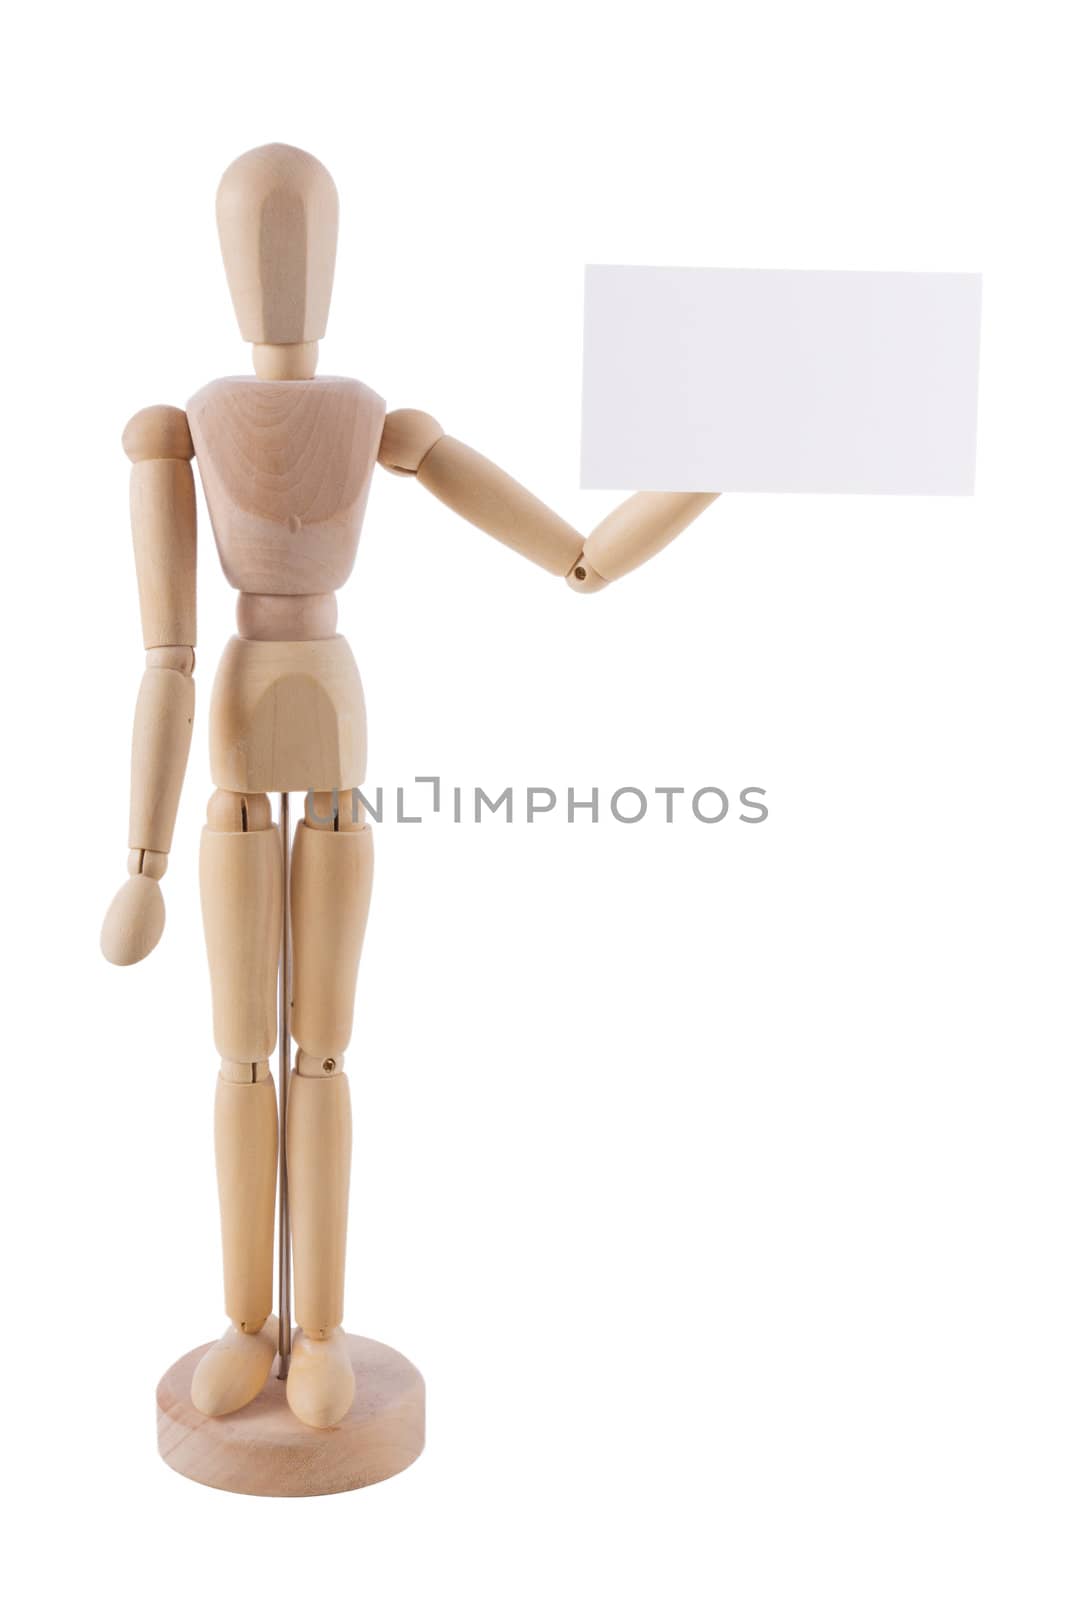 Wooden figure with raised arm holding a card with space for your text